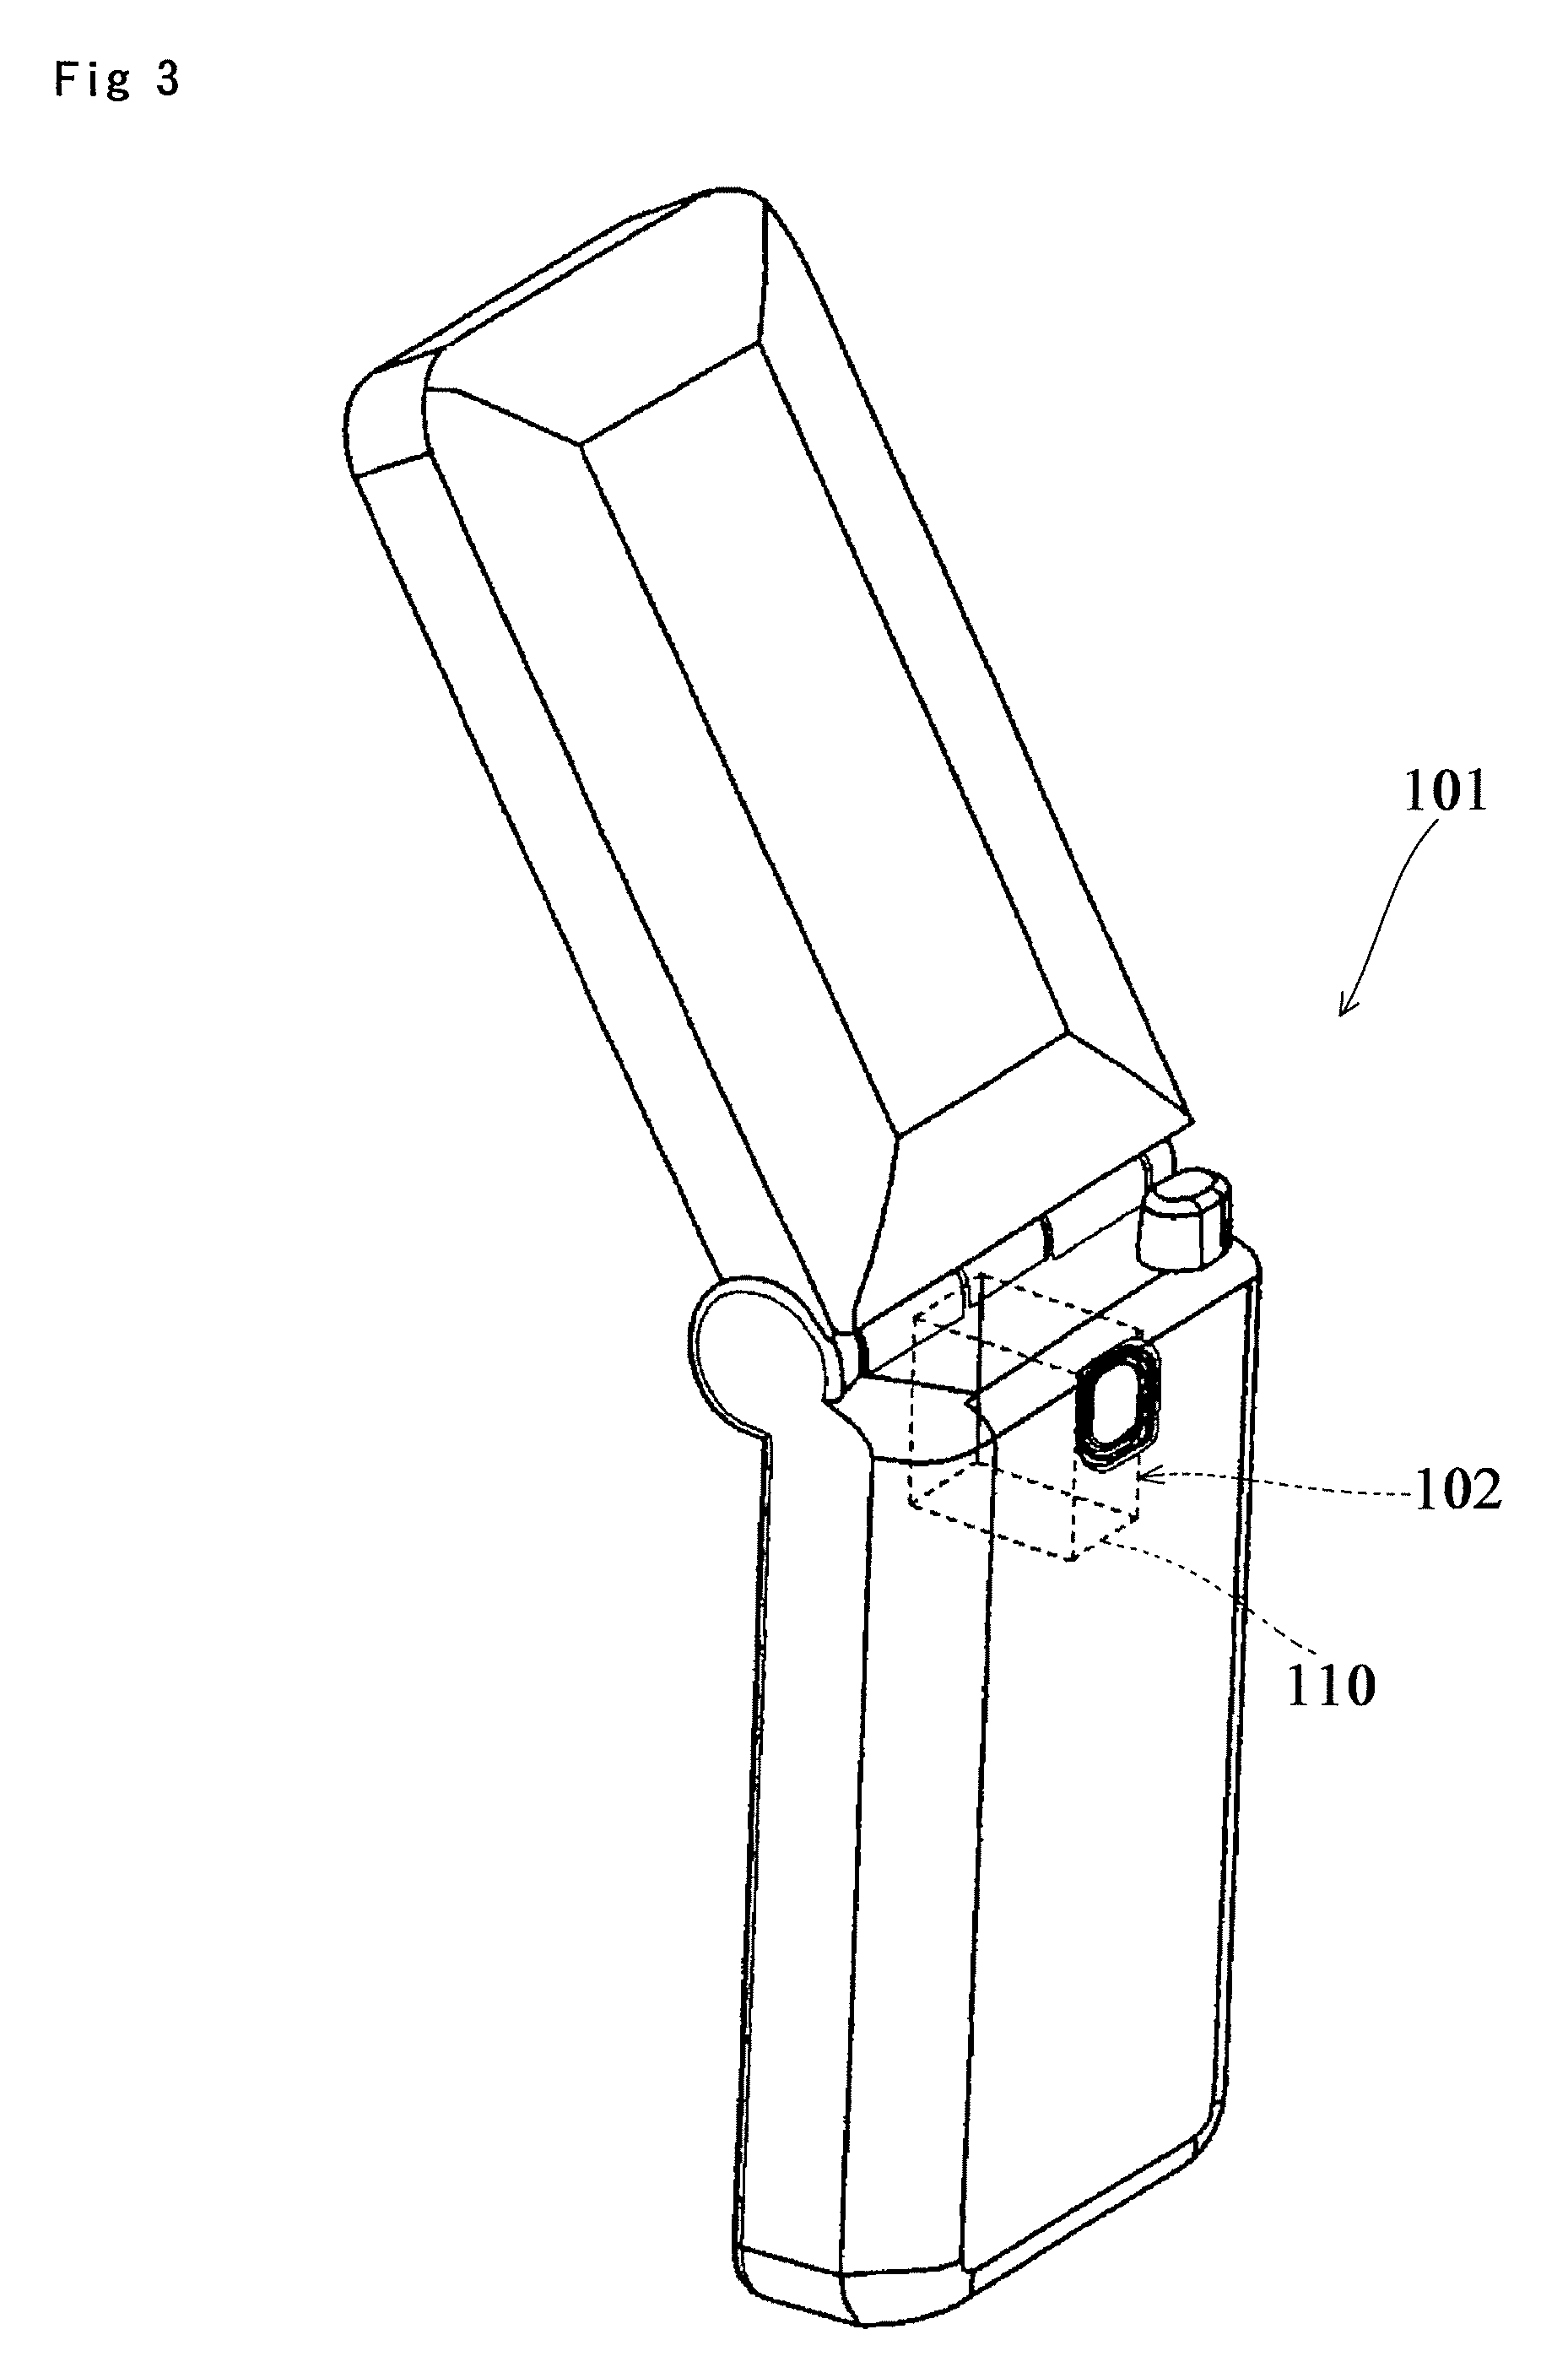 Sliding device composed of combined structure of screw bolt and nut